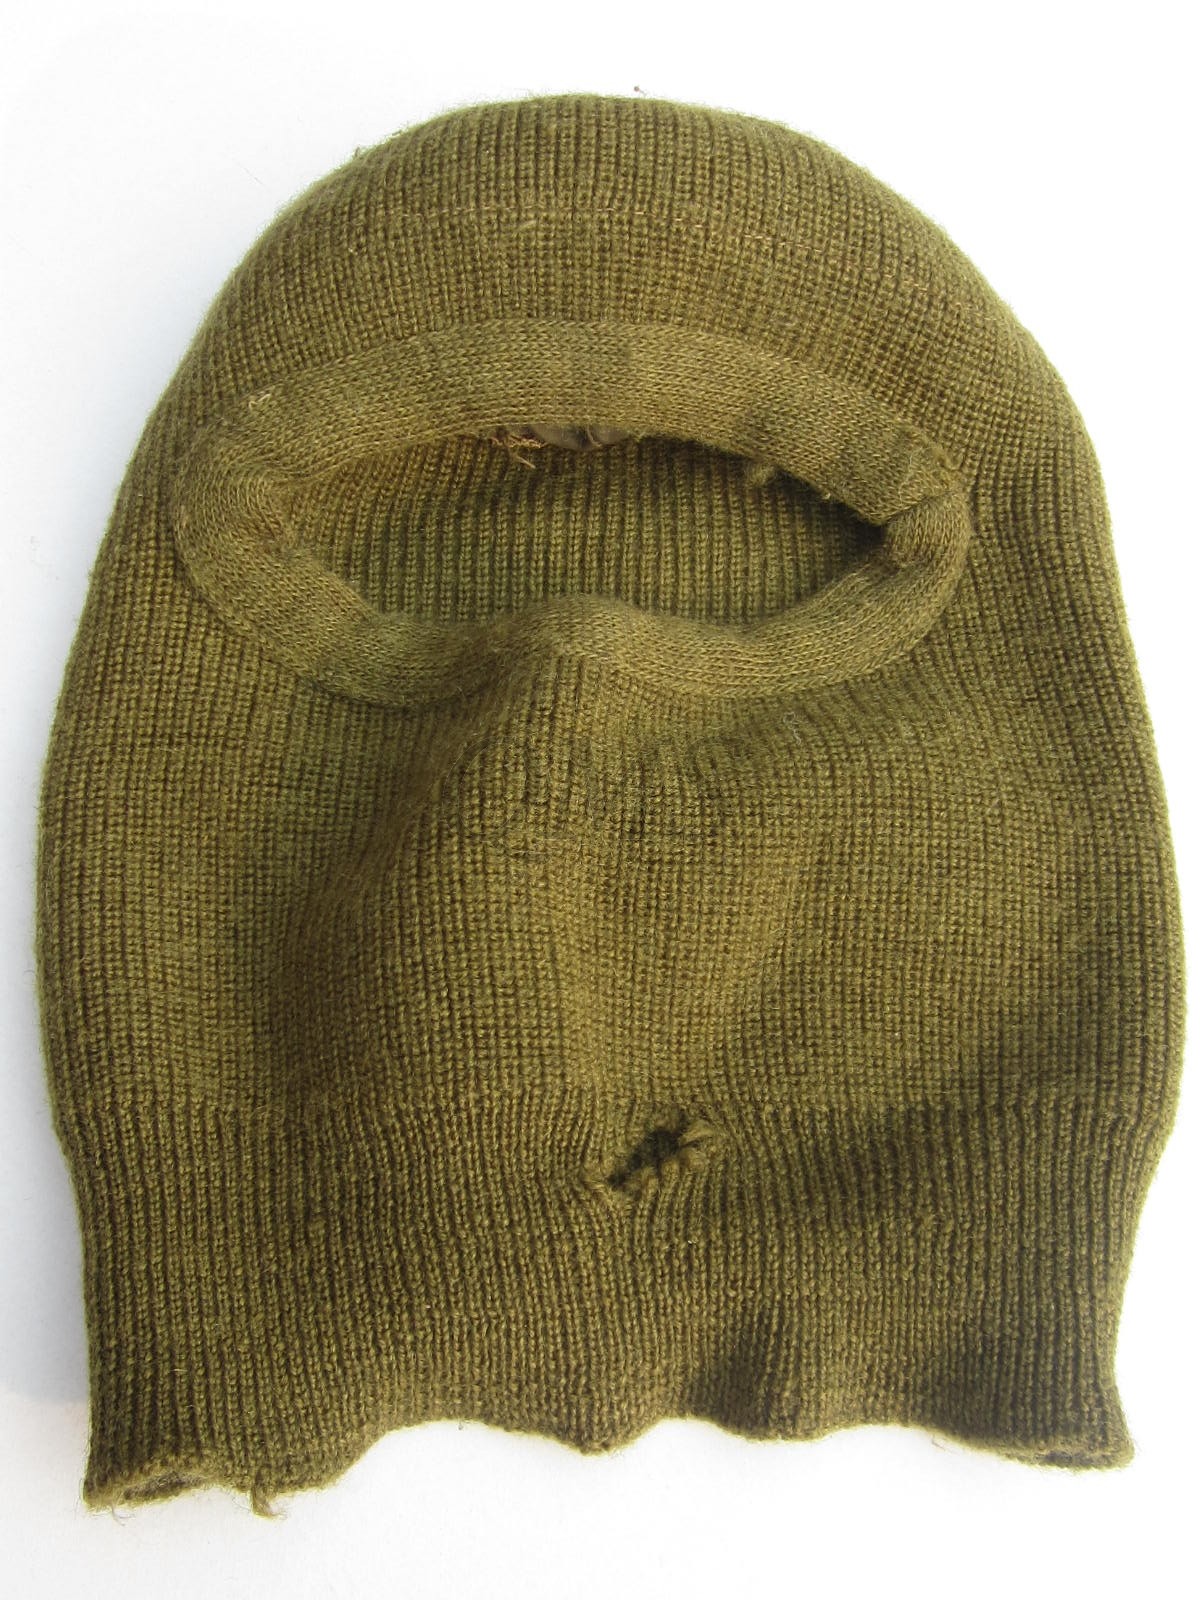 WW2 Canadian Issue knitted balaclava.